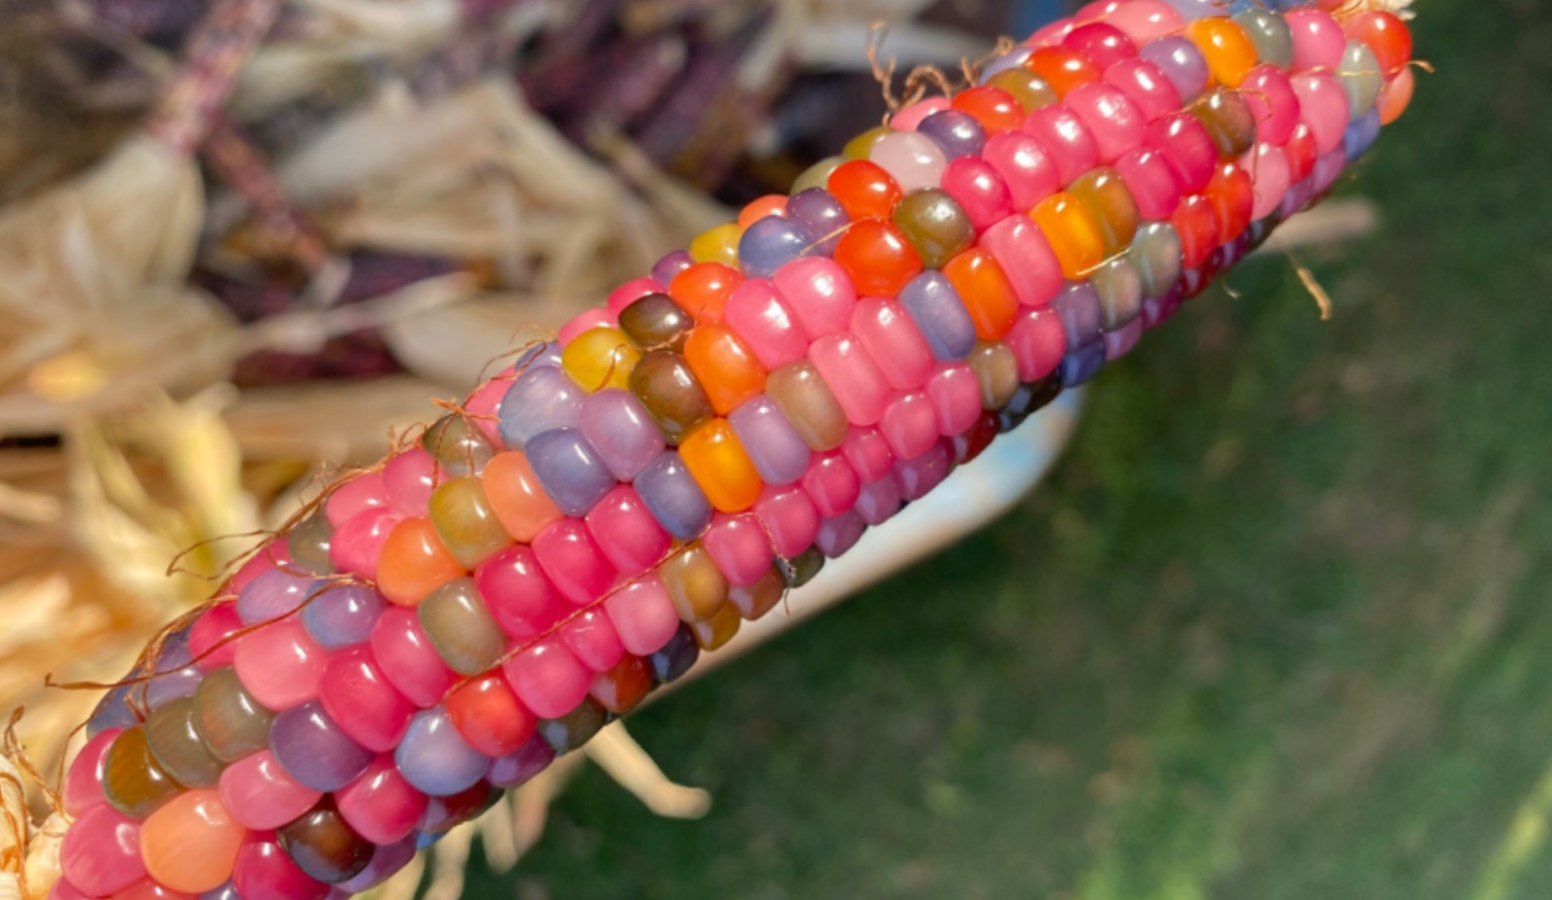 Grow Your Own Rainbow Corn this Fall and Experience Magic